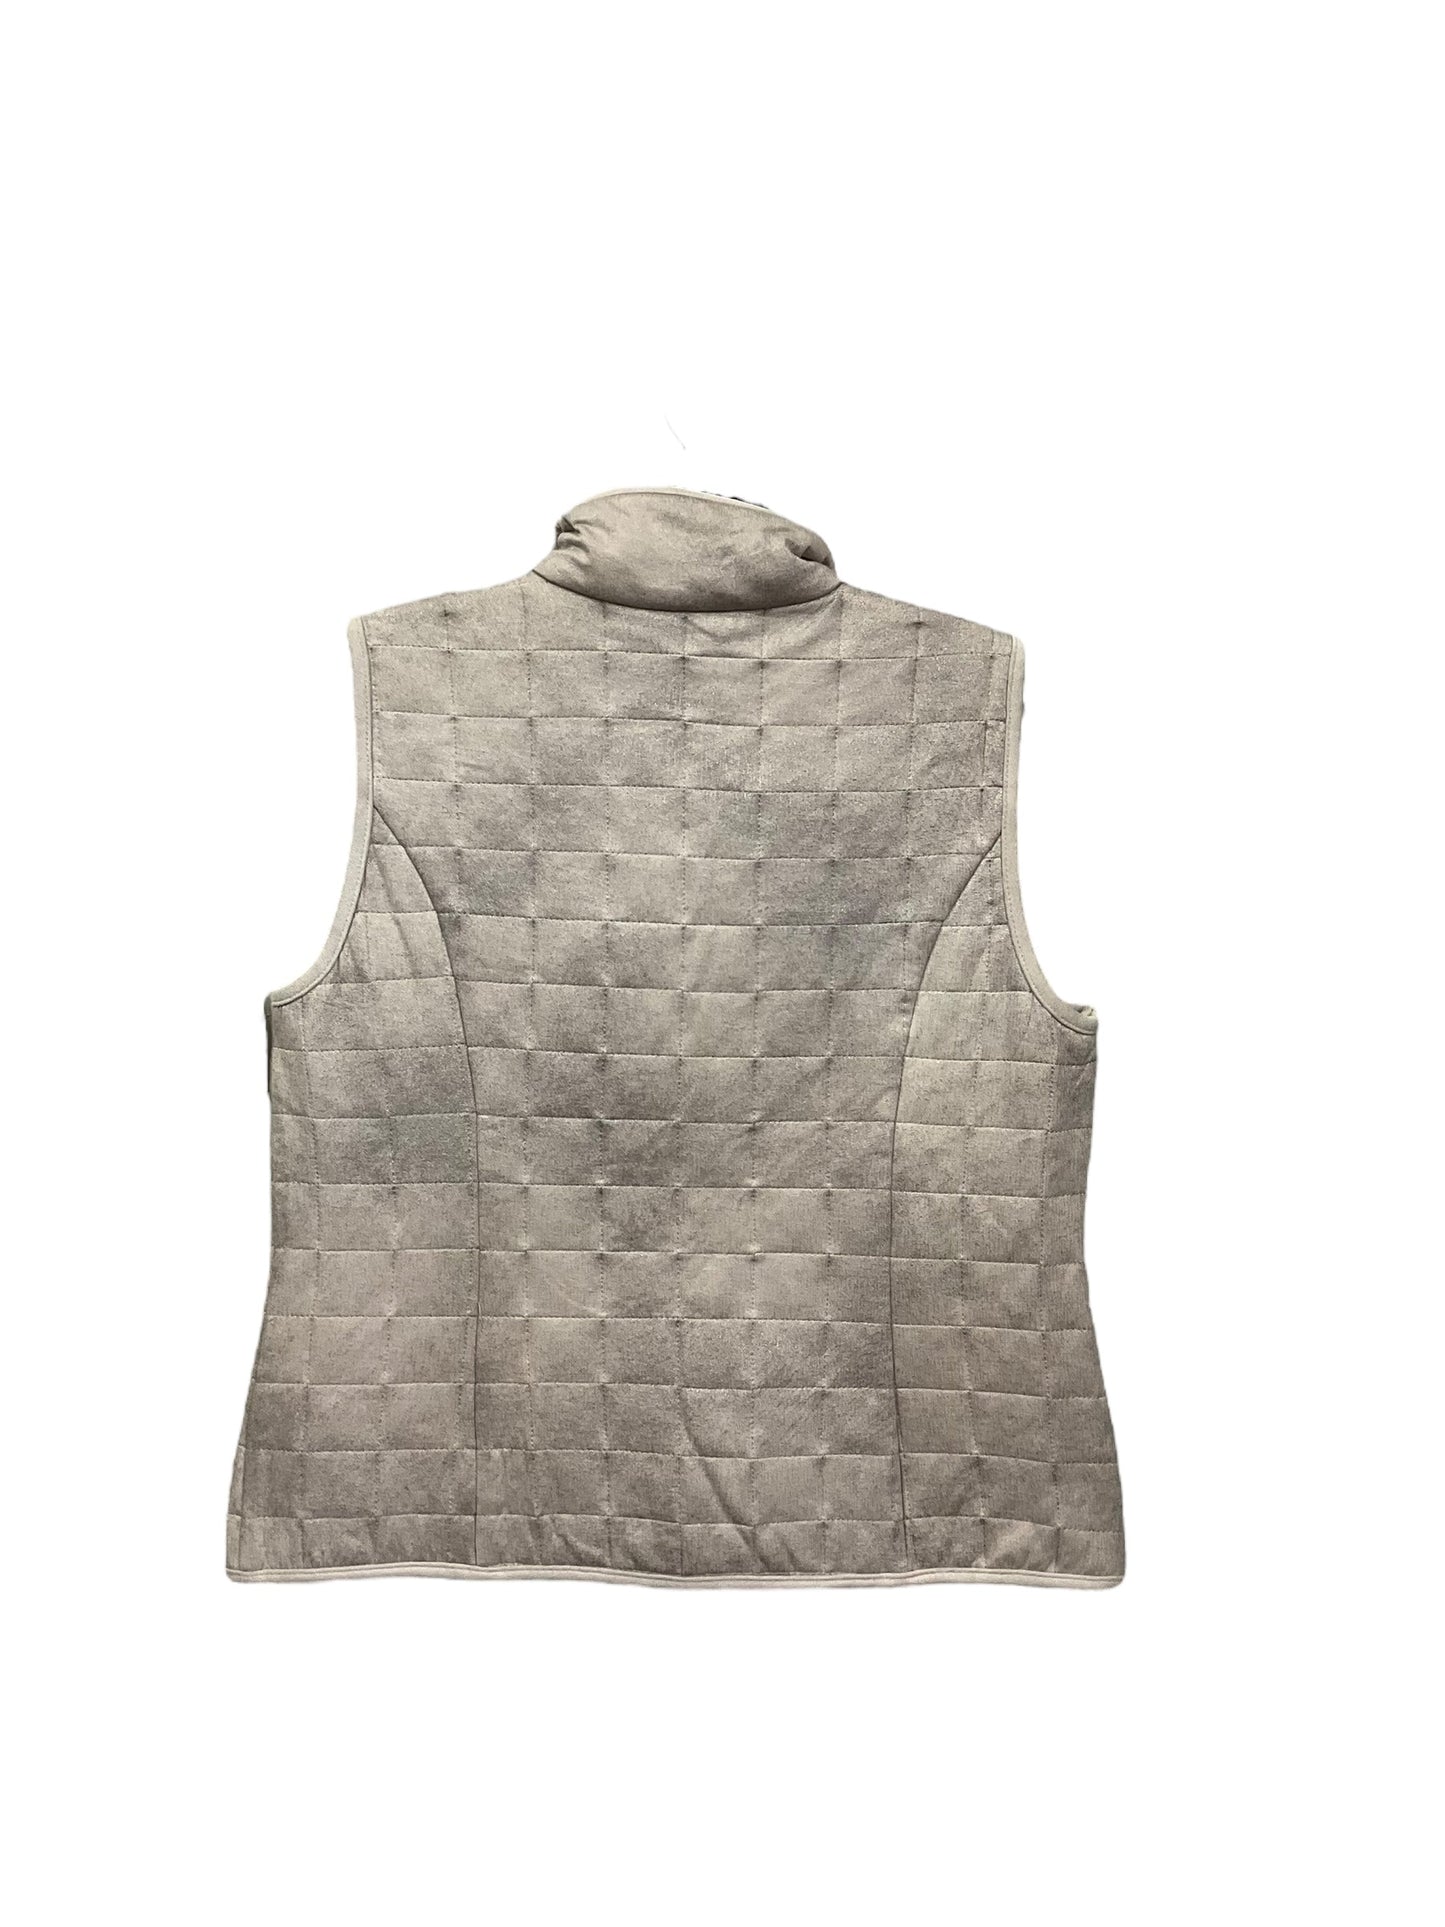 Vest Other By Clothes Mentor  Size: M